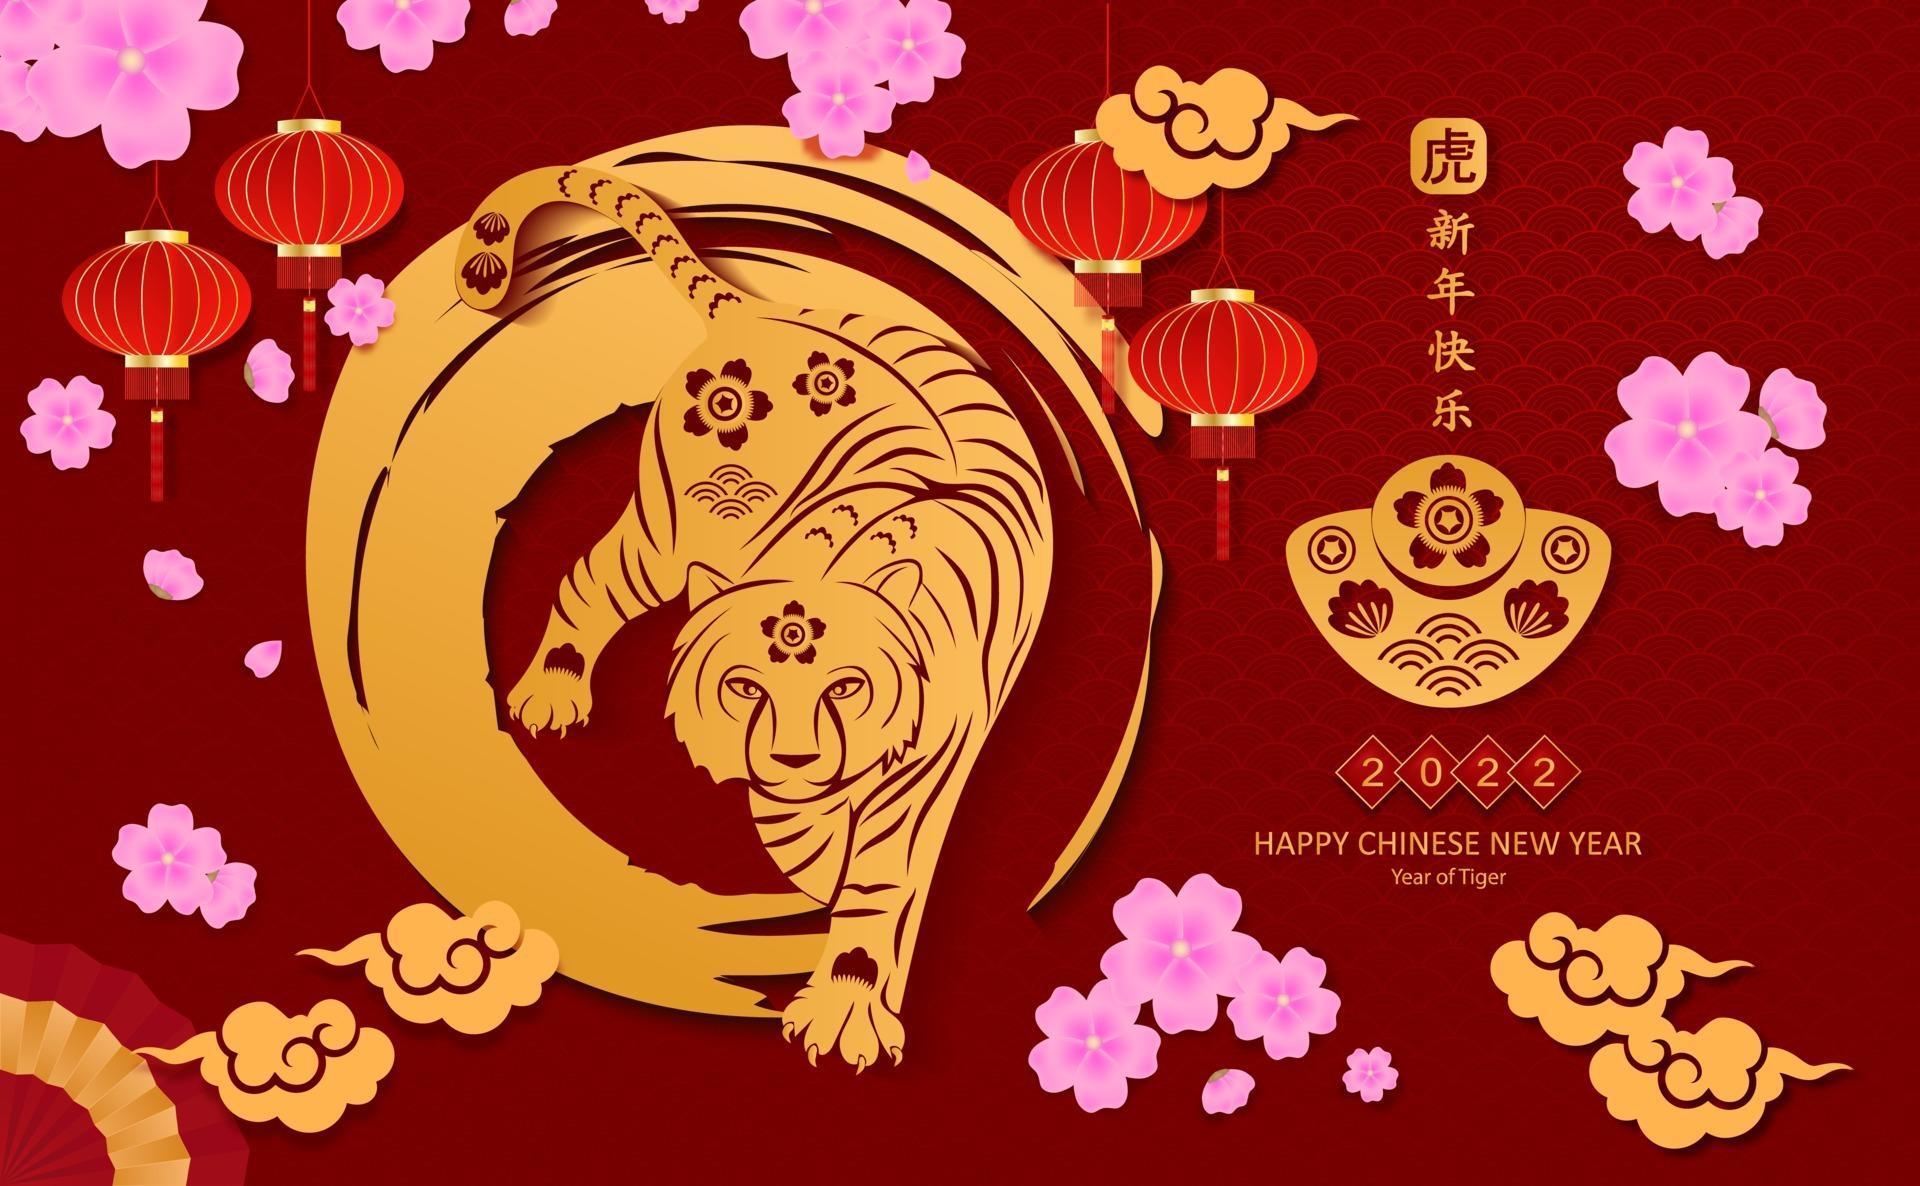 When Does The Chinese New Year Begin In 2022 Bathroom Ideas